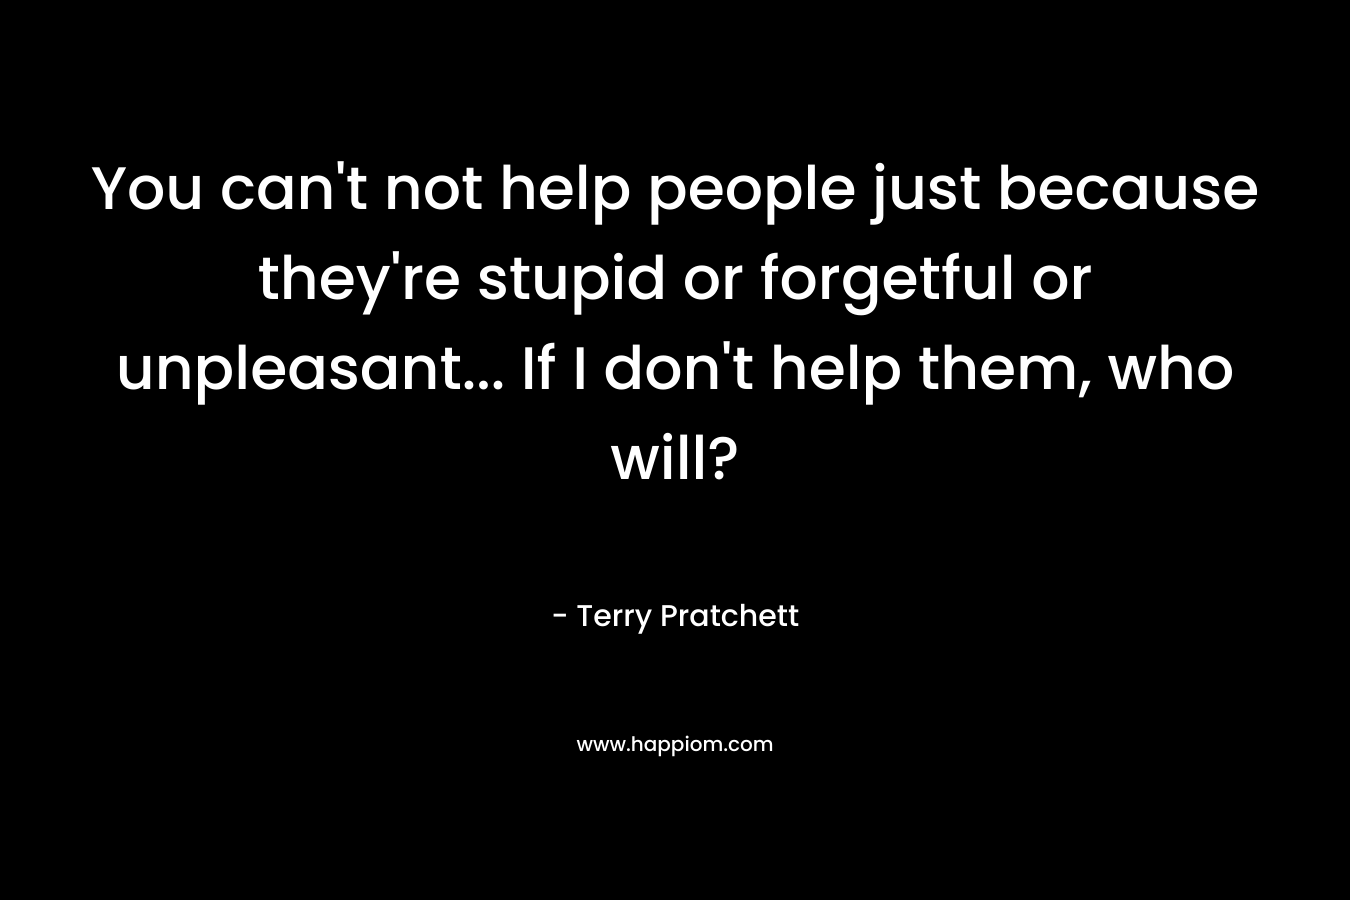 You can't not help people just because they're stupid or forgetful or unpleasant... If I don't help them, who will?